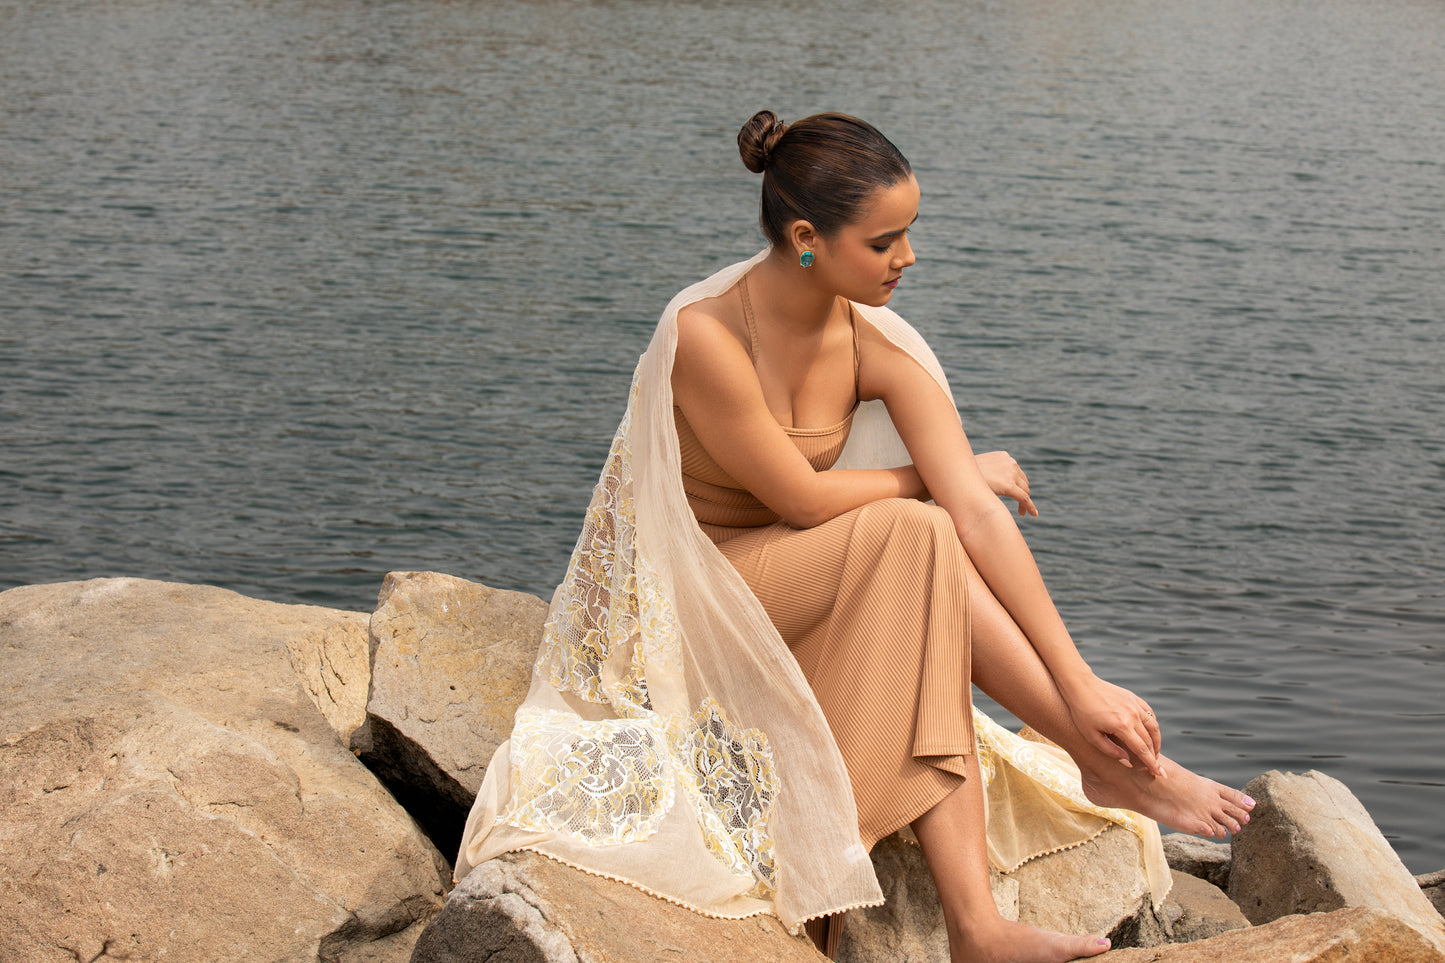 Indulge in luxury with our designer wool stole, a timeless accessory perfect for women seeking sophistication. Crafted with care, our beige scarf adds elegance to any ensemble with its exquisite silk blend and intricate design.